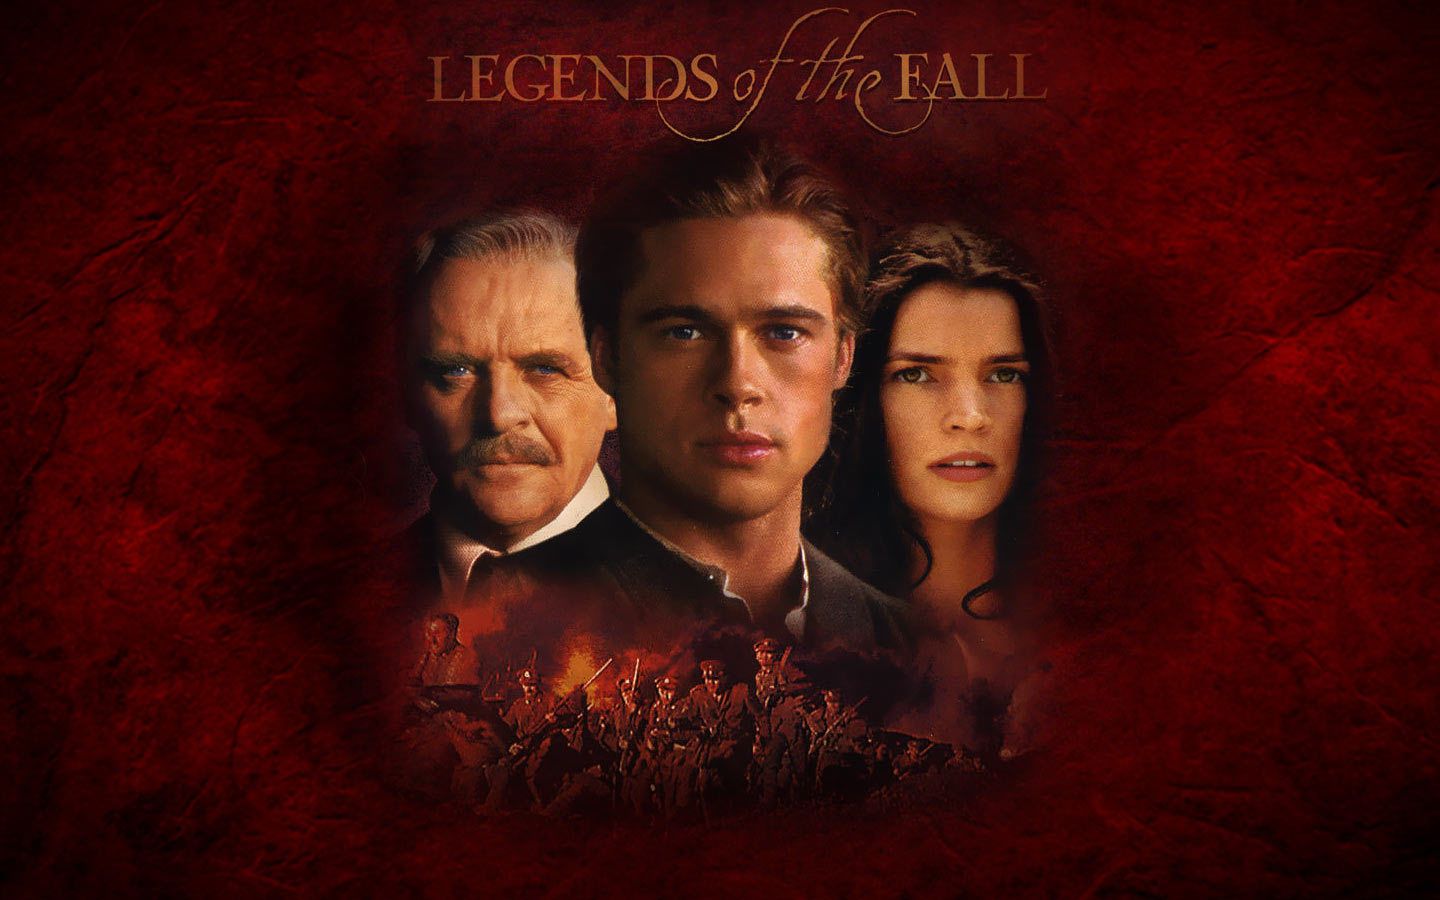 Legends of the Fall of the Fall Wallpaper